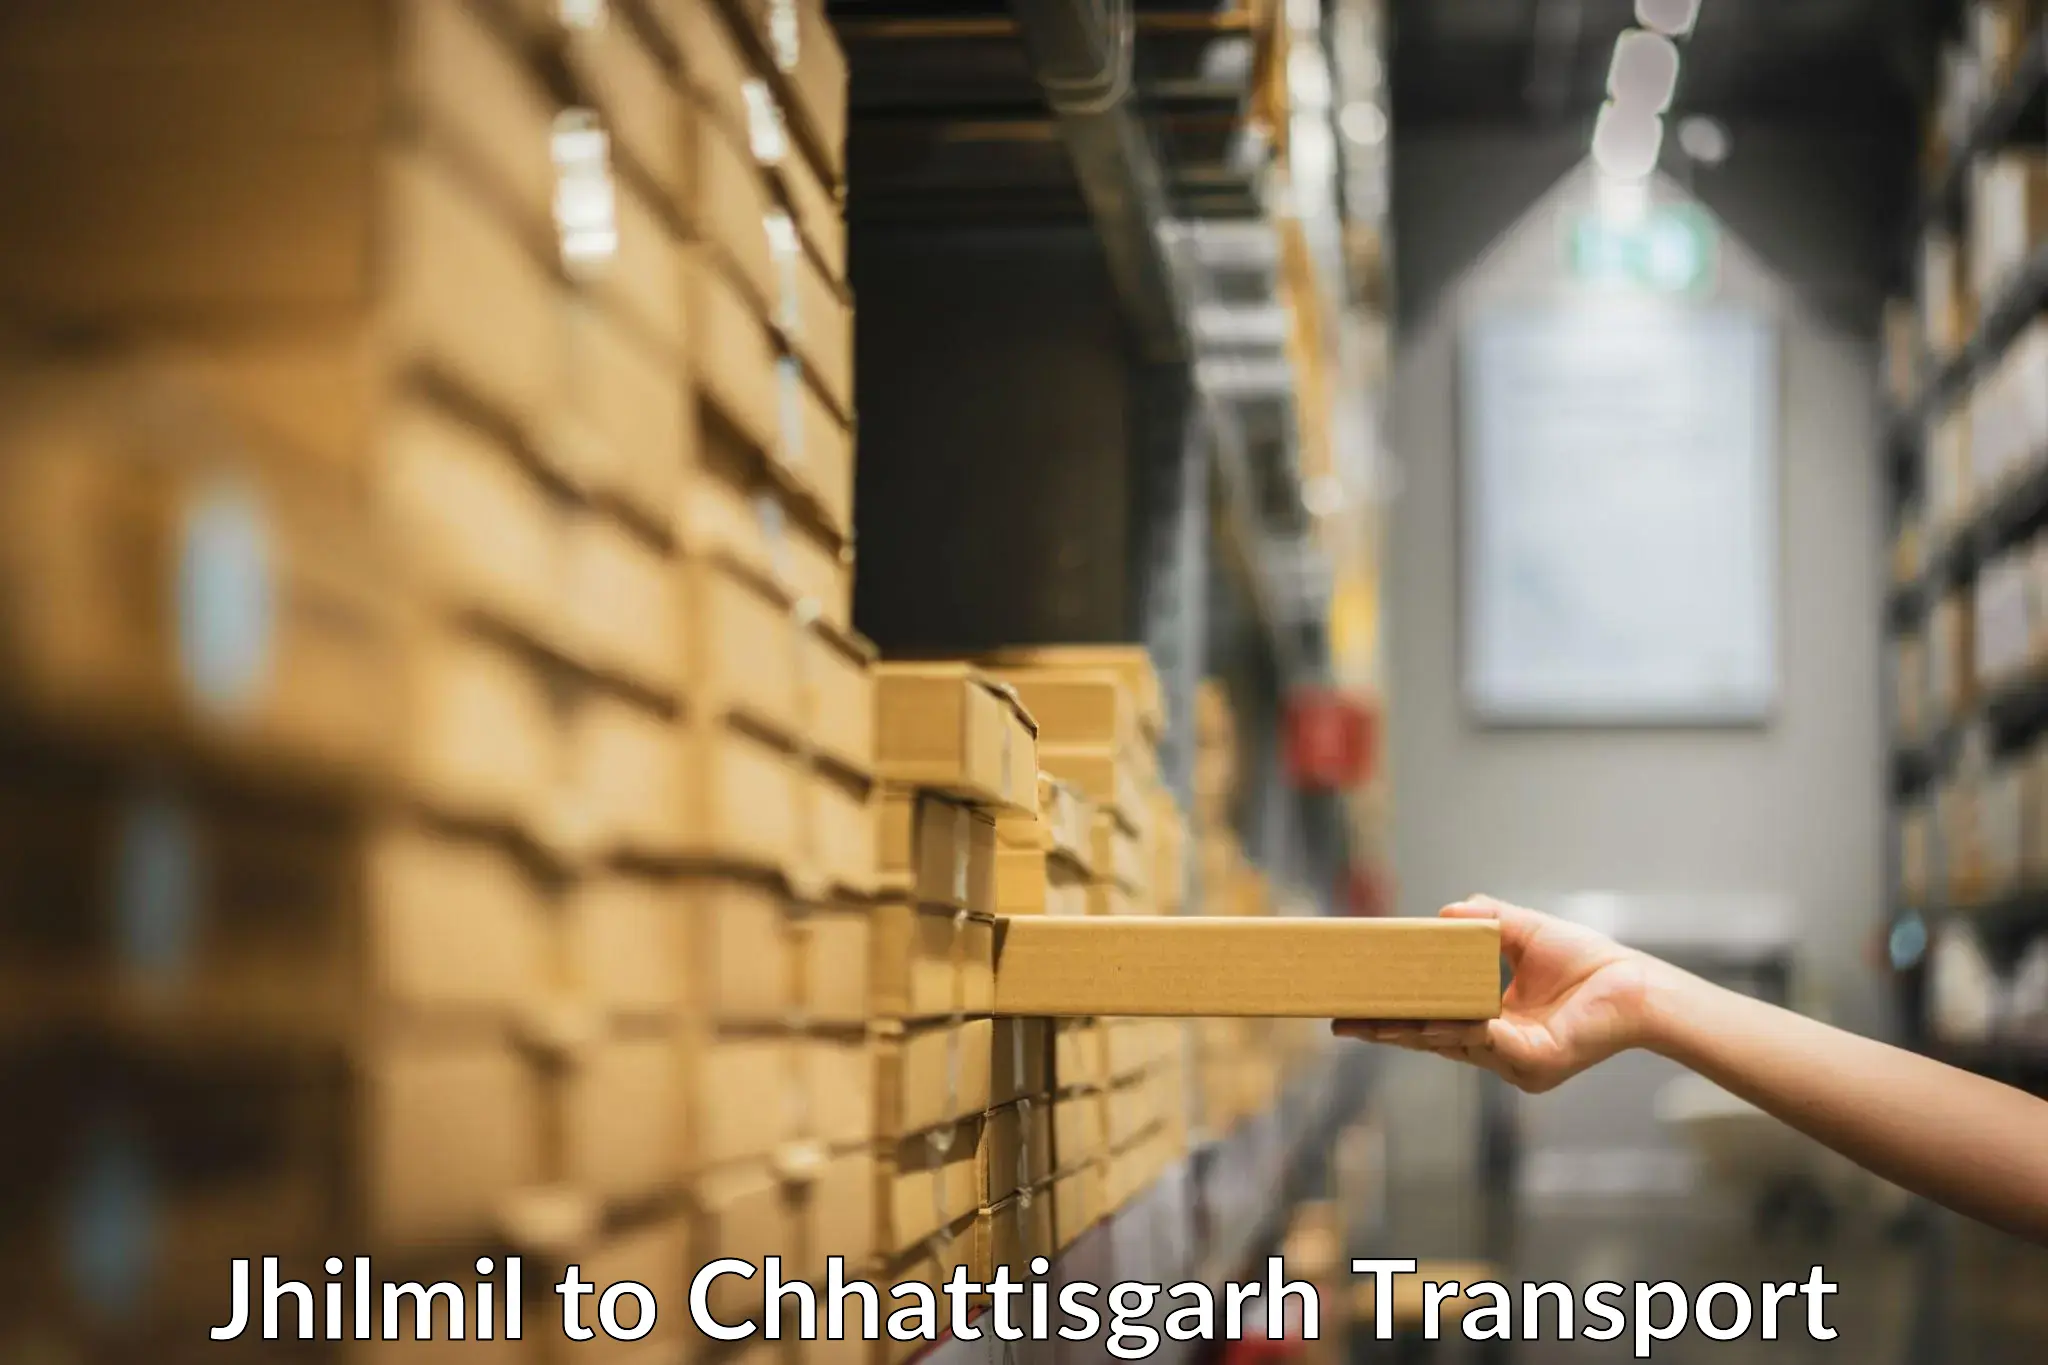 Truck transport companies in India Jhilmil to bagbahra